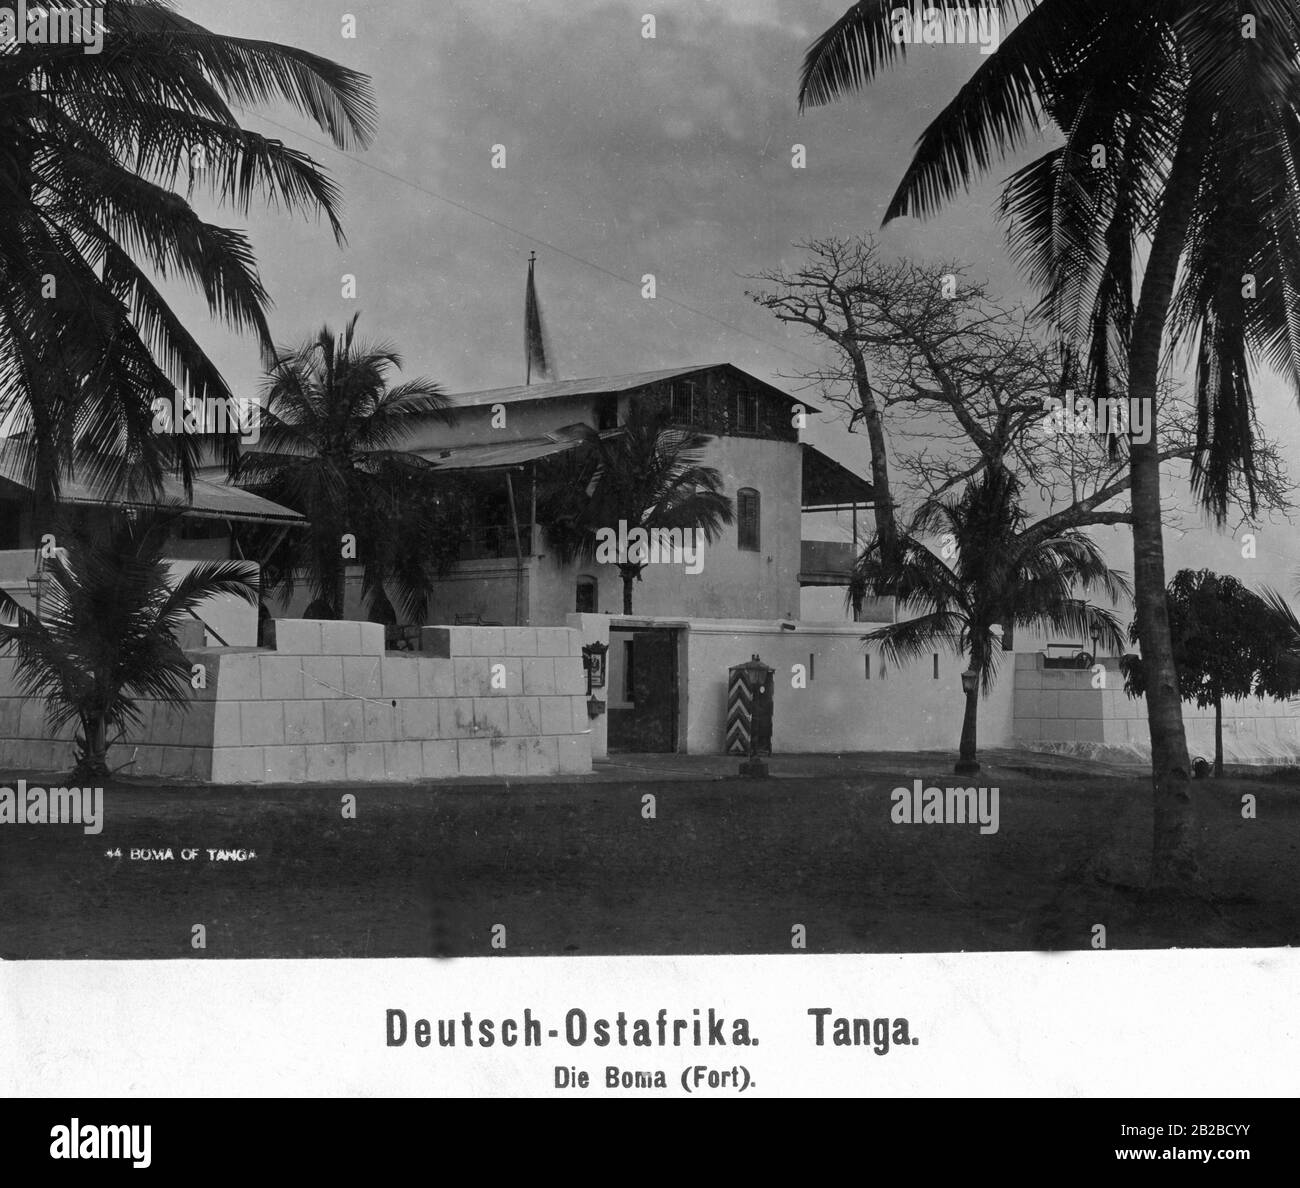 The boma of Tanga. Boma is an expression of the Swahili language for a fortified building. In the colonial period, the seats of the administrations were usually located here, so that the term was gained currency for the local administrative seats. Undated photo. Stock Photo